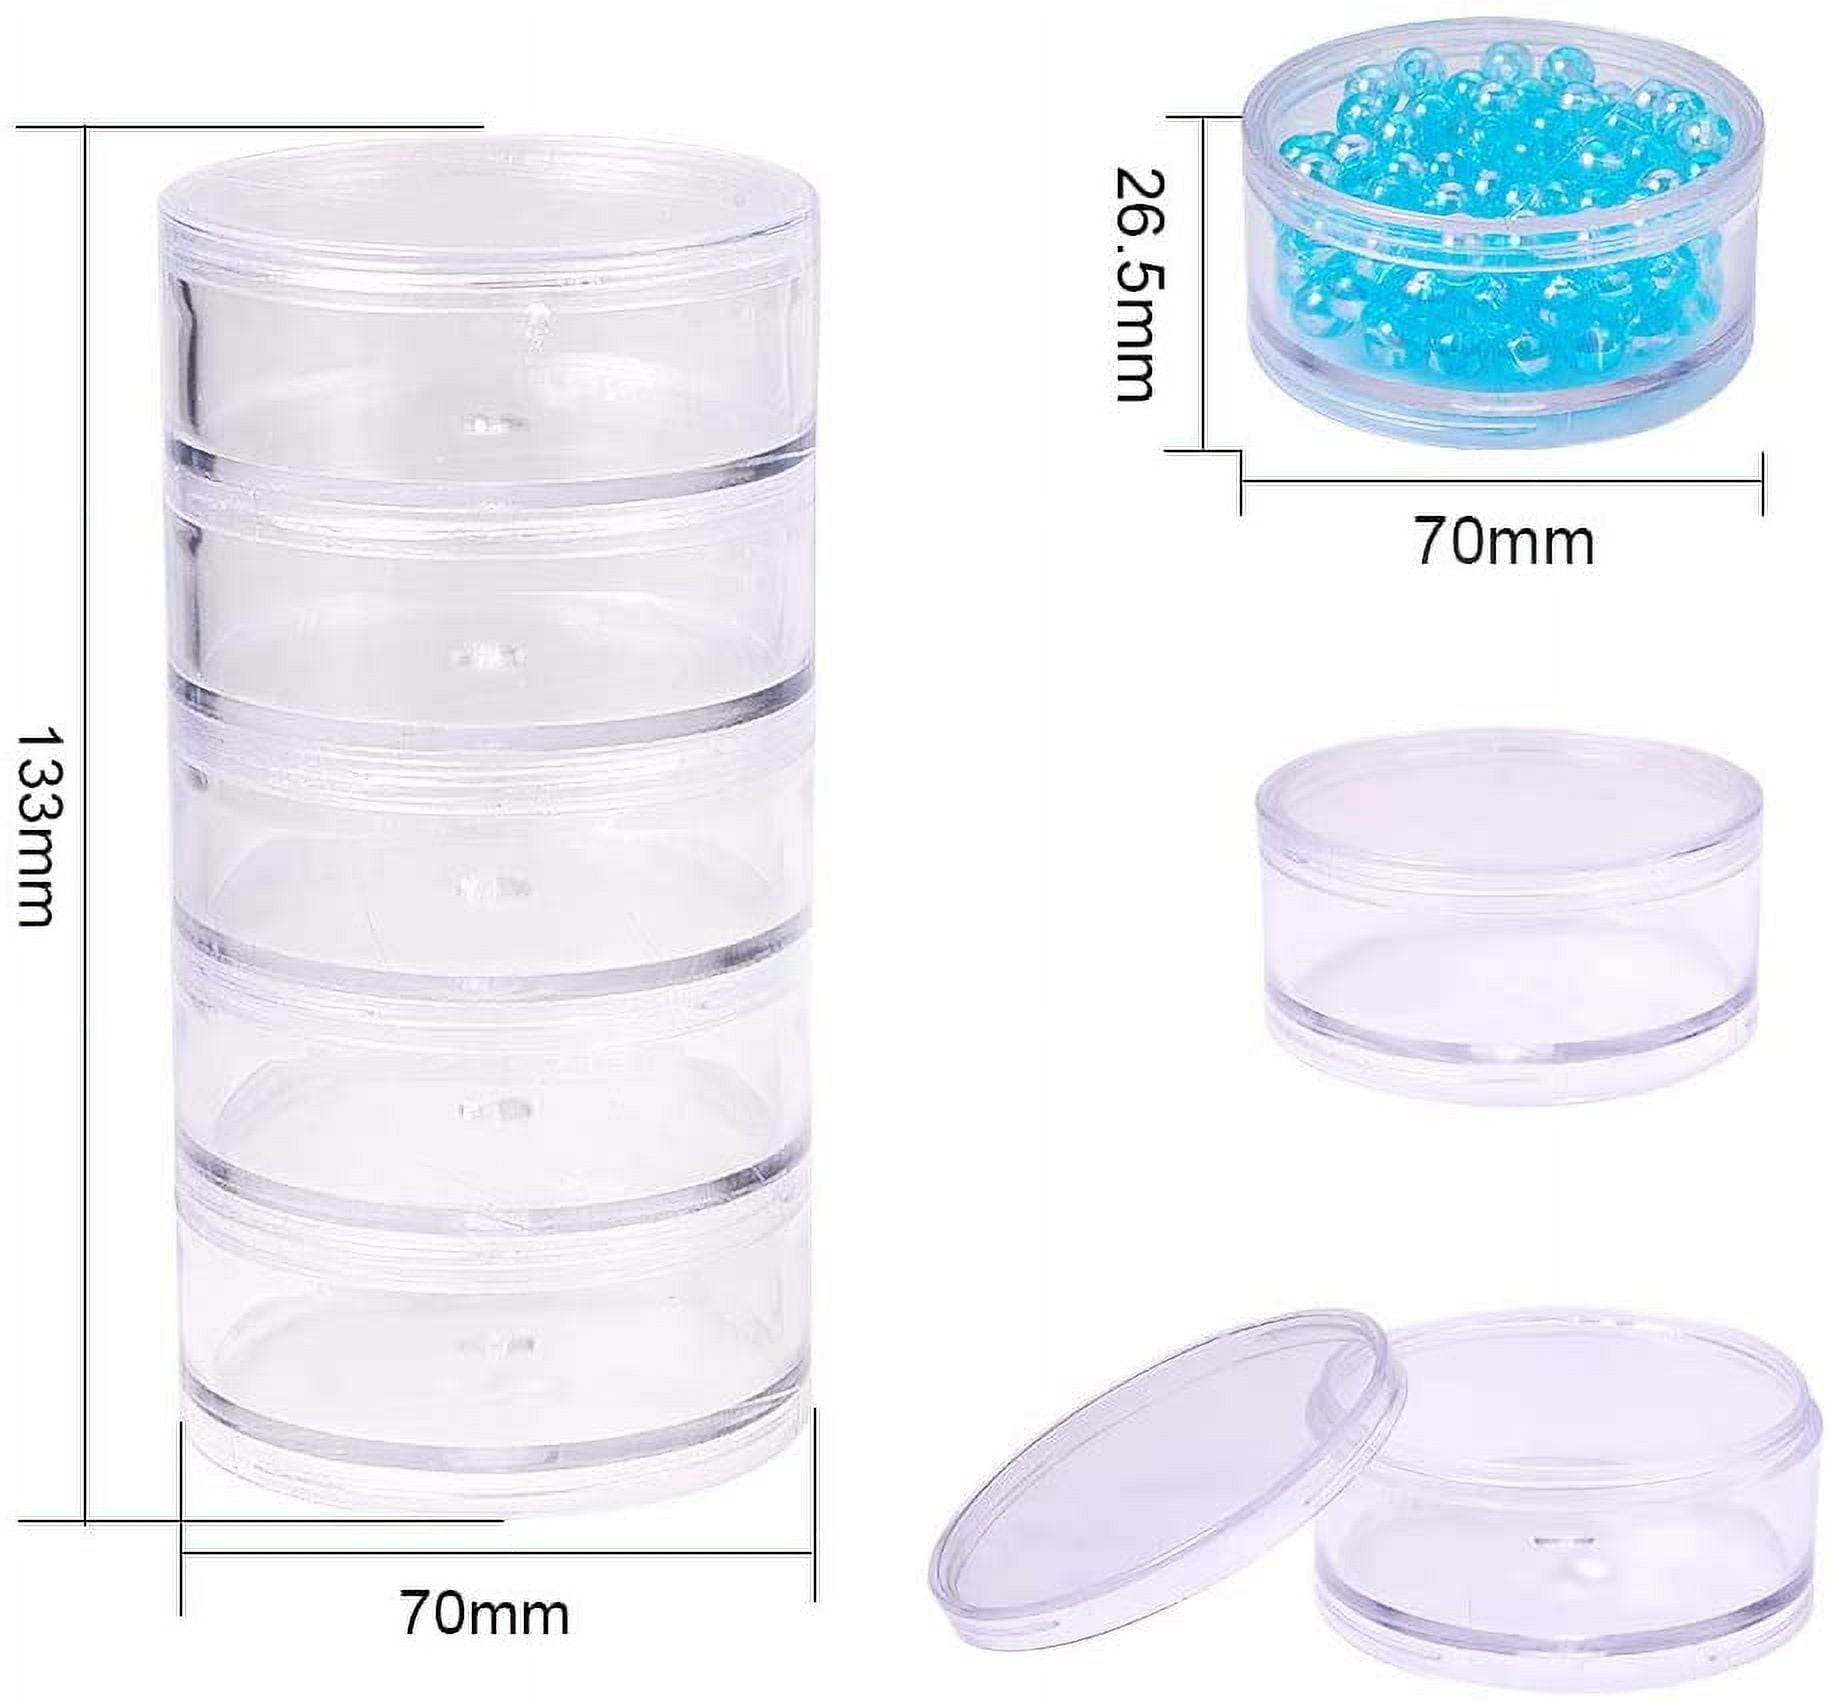  TDOTM 4/5 Layer Beads Storage Organizer, Stackable Transparent  Round Cylinder Plastic Cosmetics Jewelry Beads Sewing Pills Storage Jars  Container Box (4Layer) : Arts, Crafts & Sewing